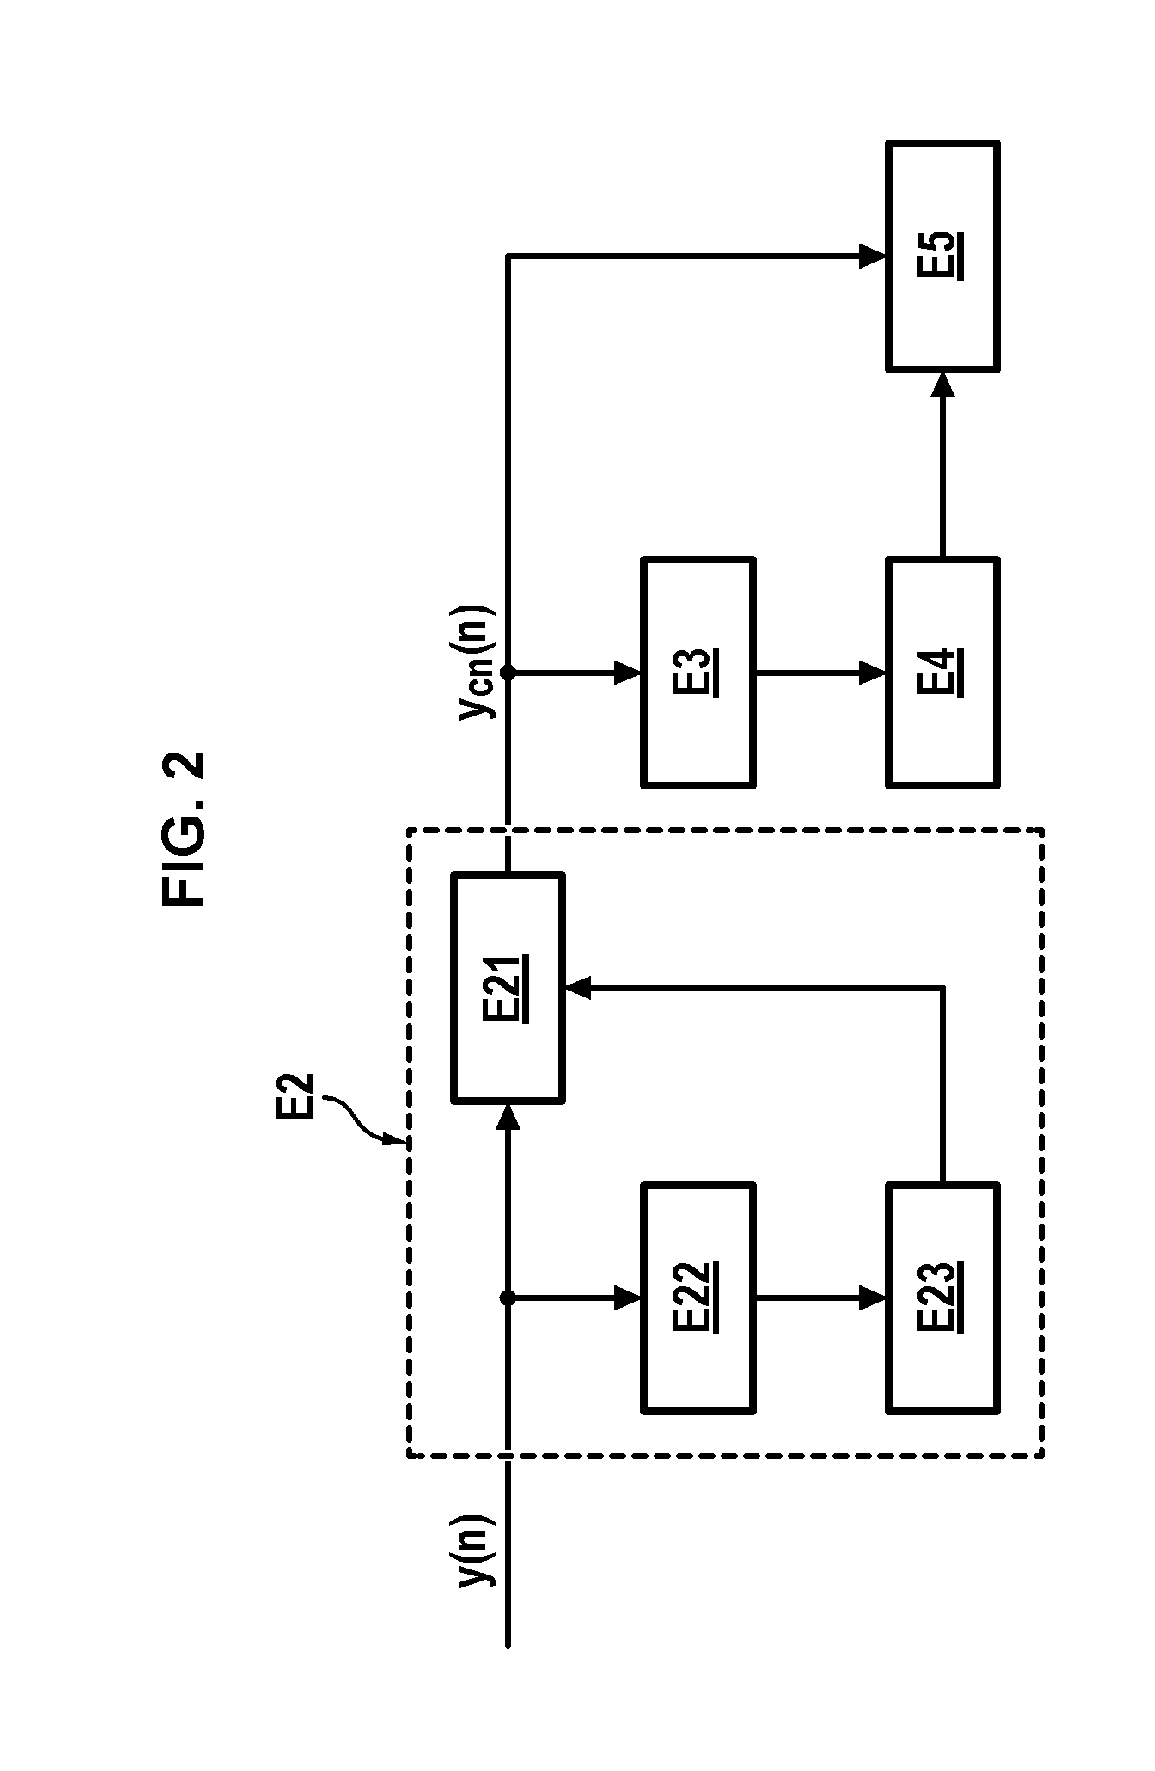 Method For Estimating Parameters Of Signals Contained In A Frequency Band